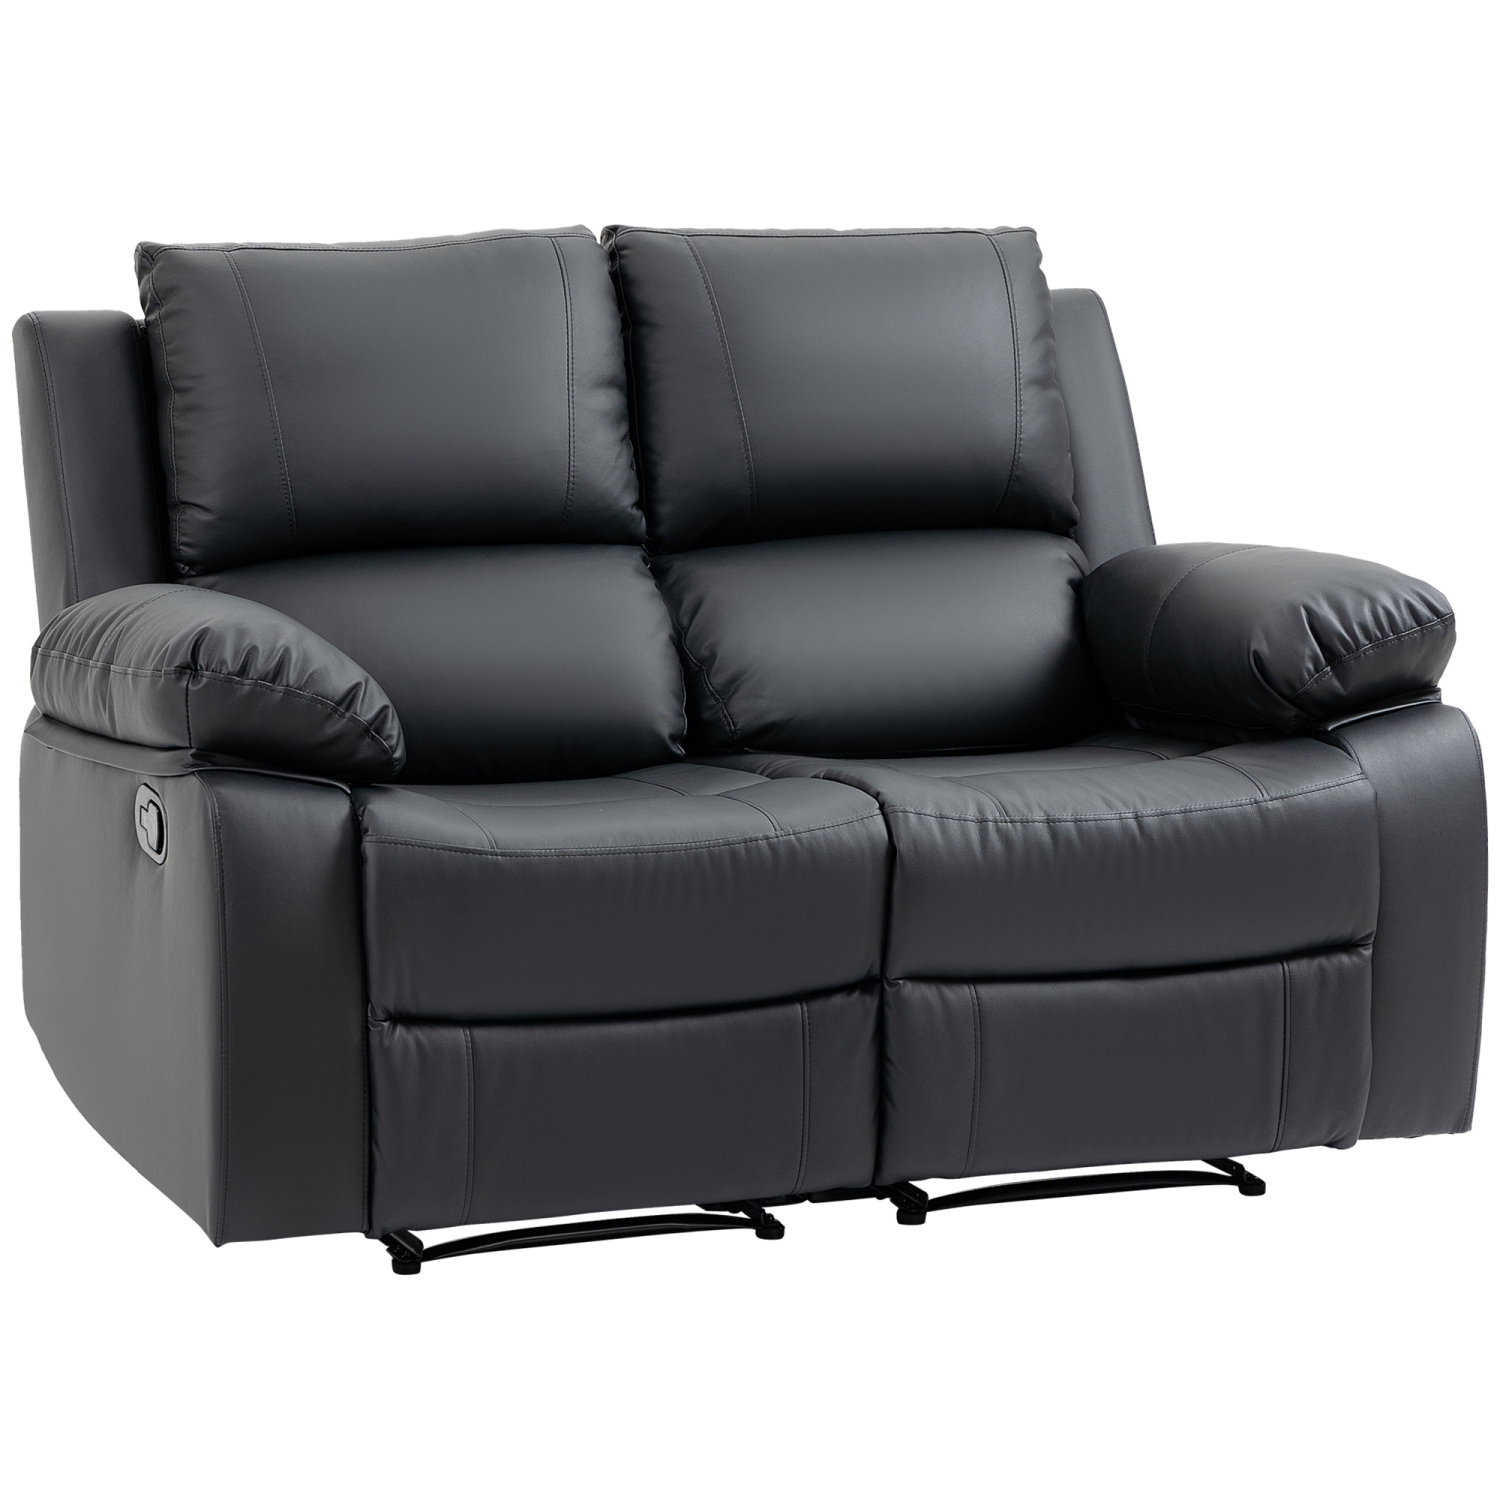 HOMCOM Double Reclining Loveseat, PU Leather Manual Recliner Chair with Pullback Control Footrest for Living Room, Black